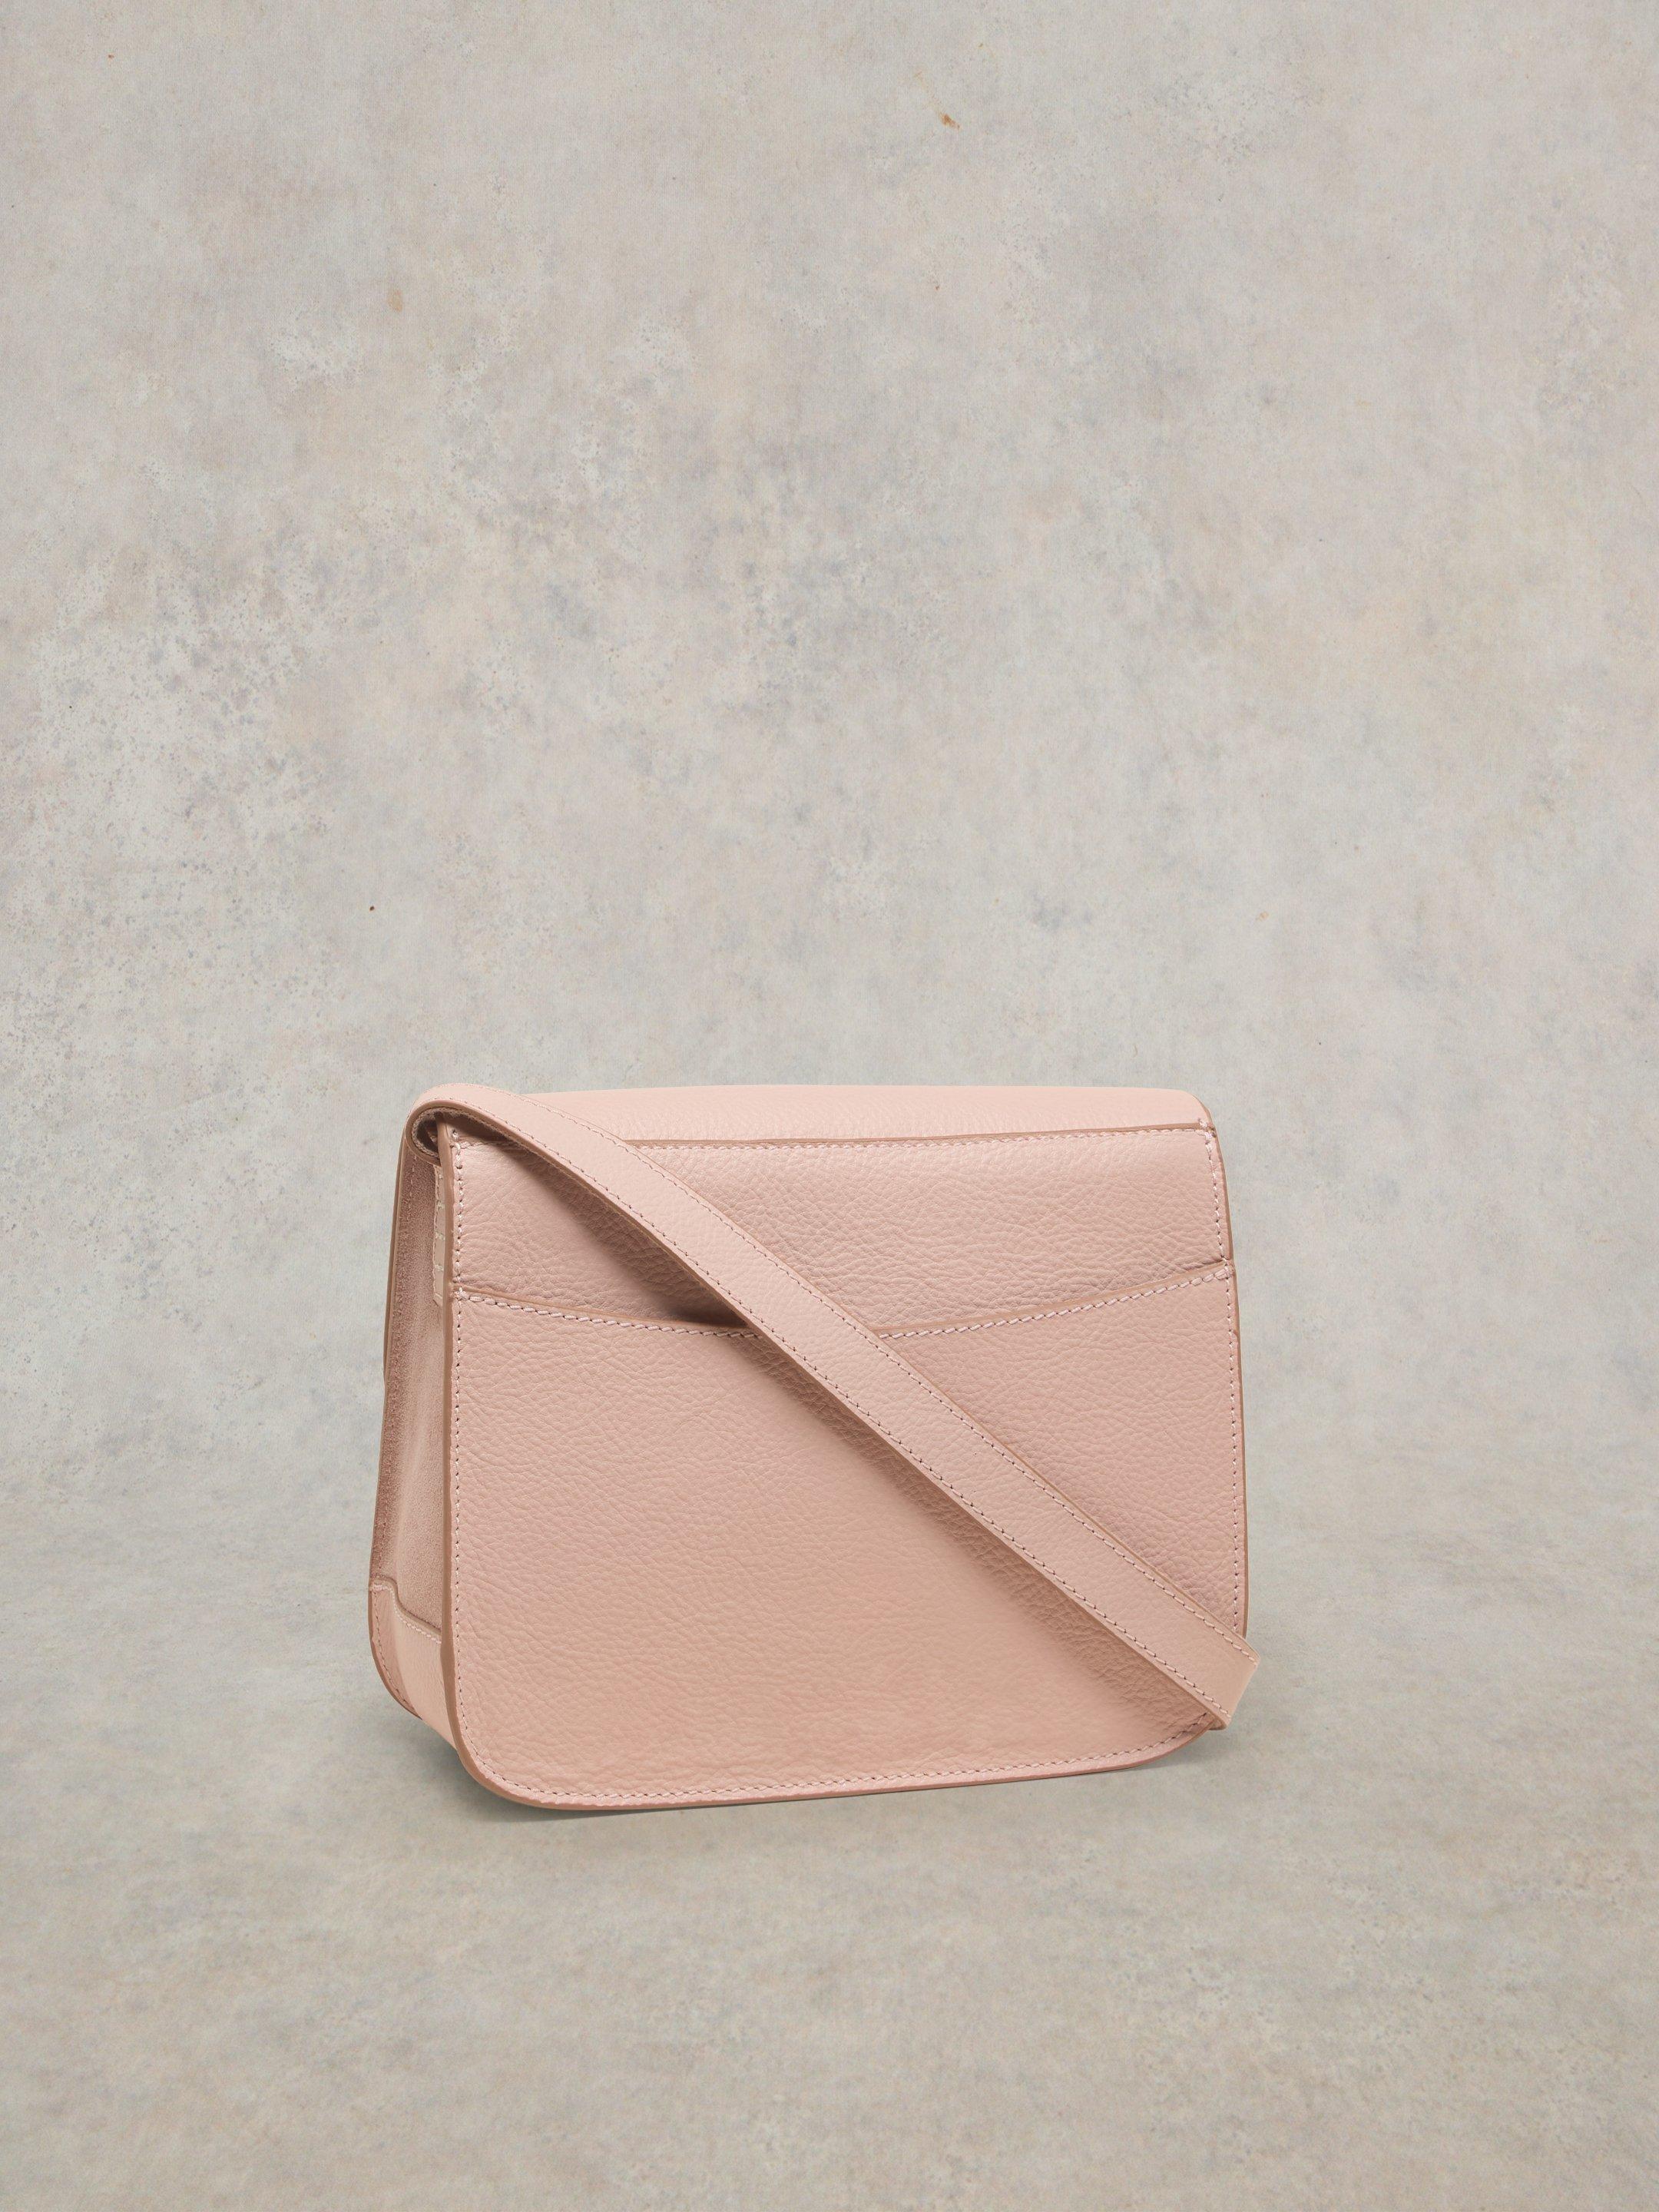 Evie Leather Satchel in LGT PINK - FLAT BACK